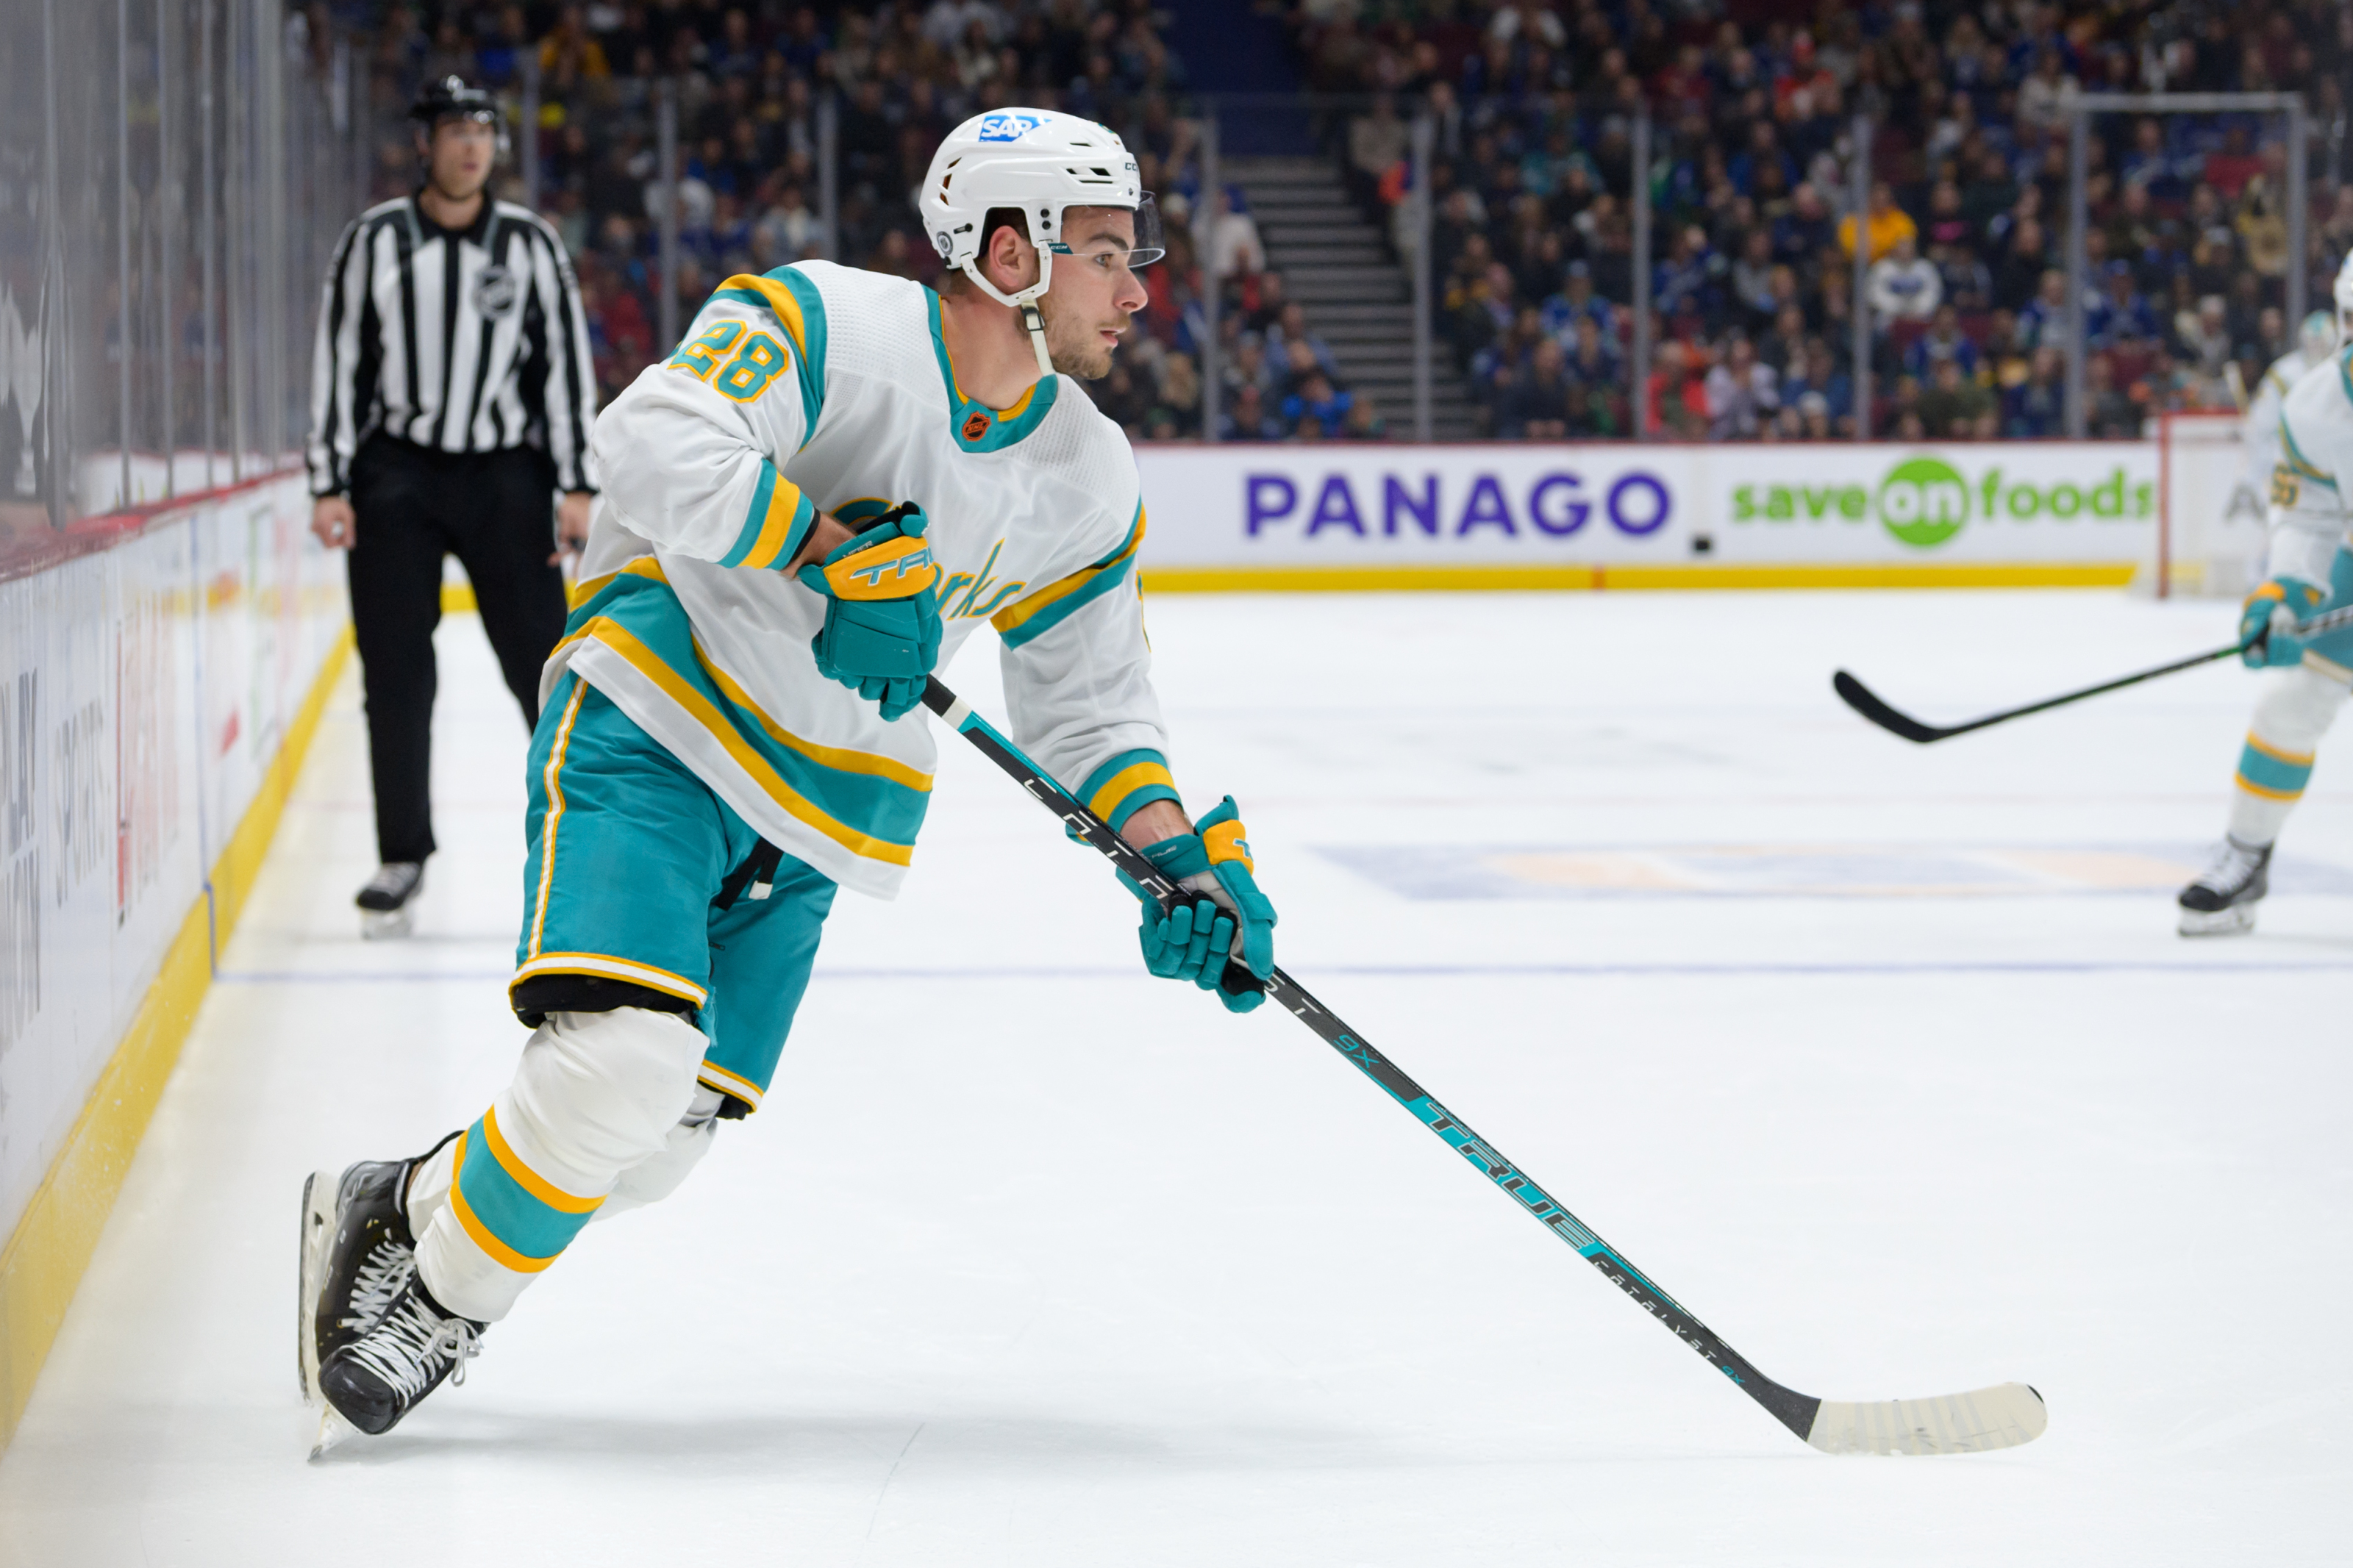 What can San Jose Sharks fans expect from the MacKenzie Blackwood trade?